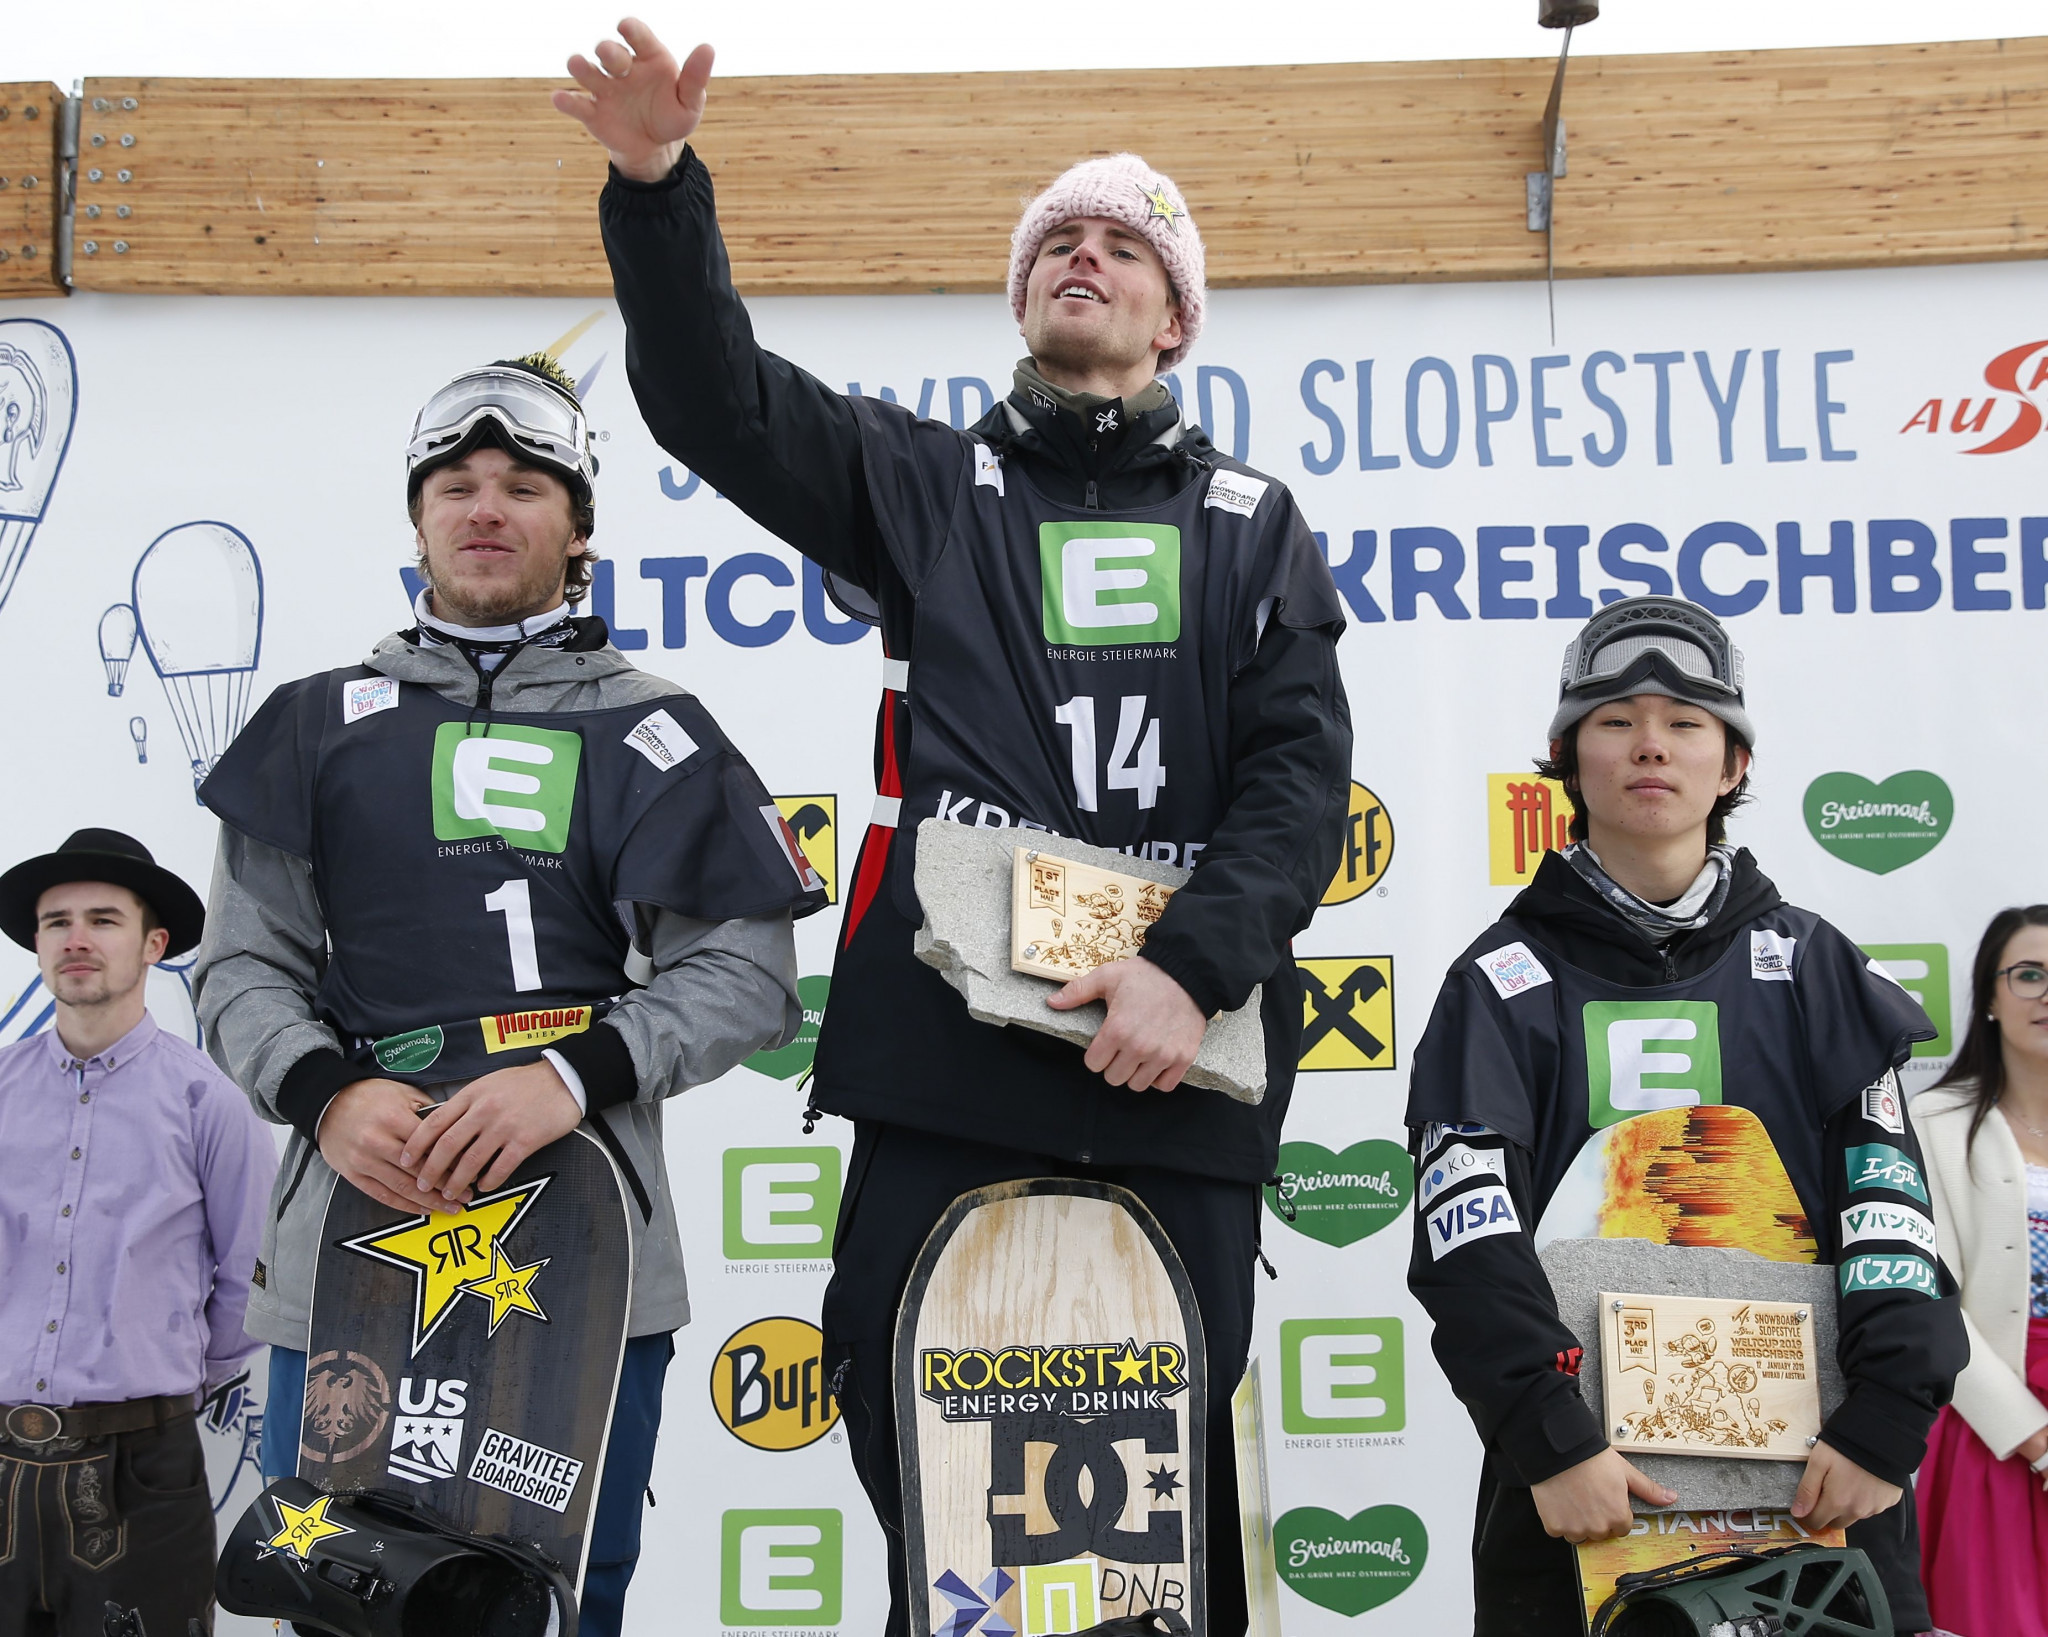 Norway's Mons Roisland won the men's slopestyle FIS Snowboard World Cup event in Kreishberg, with Chris Corning of the US coming second and Japan's Hiroaki Kunitake finishing third ©Getty Images